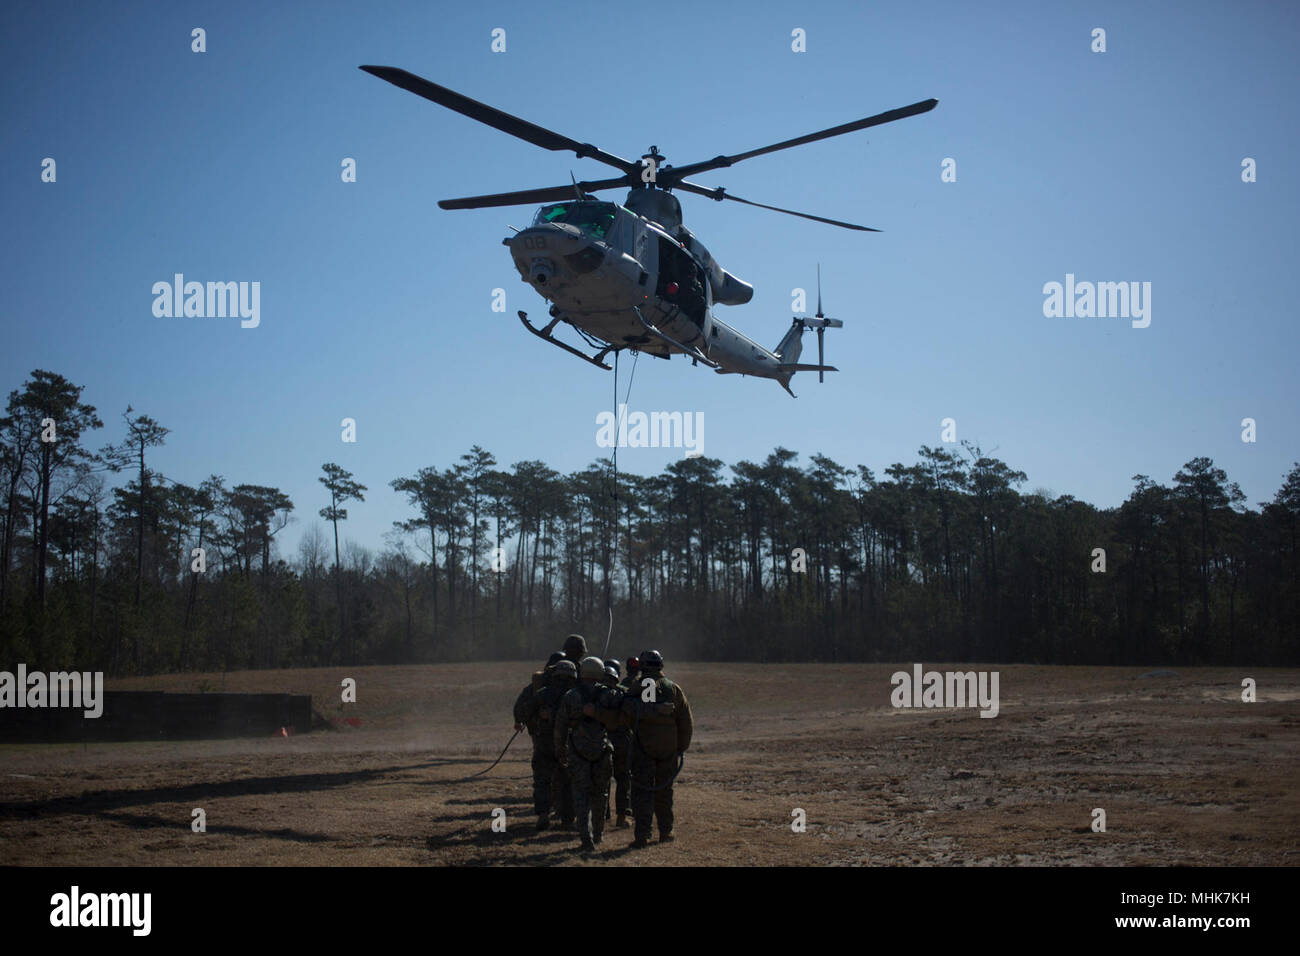 U.S. Marines with II Marine Expeditionary Force Information Group prepare to take off during special patrol insertion and extraction operations training at Camp Lejeune, N.C., March 23, 2018. The Marines conducted the training to improve operational capabilities and to recertify helicopter rope suspension techniques masters from across II MEF. (U.S. Marine Corps Stock Photo